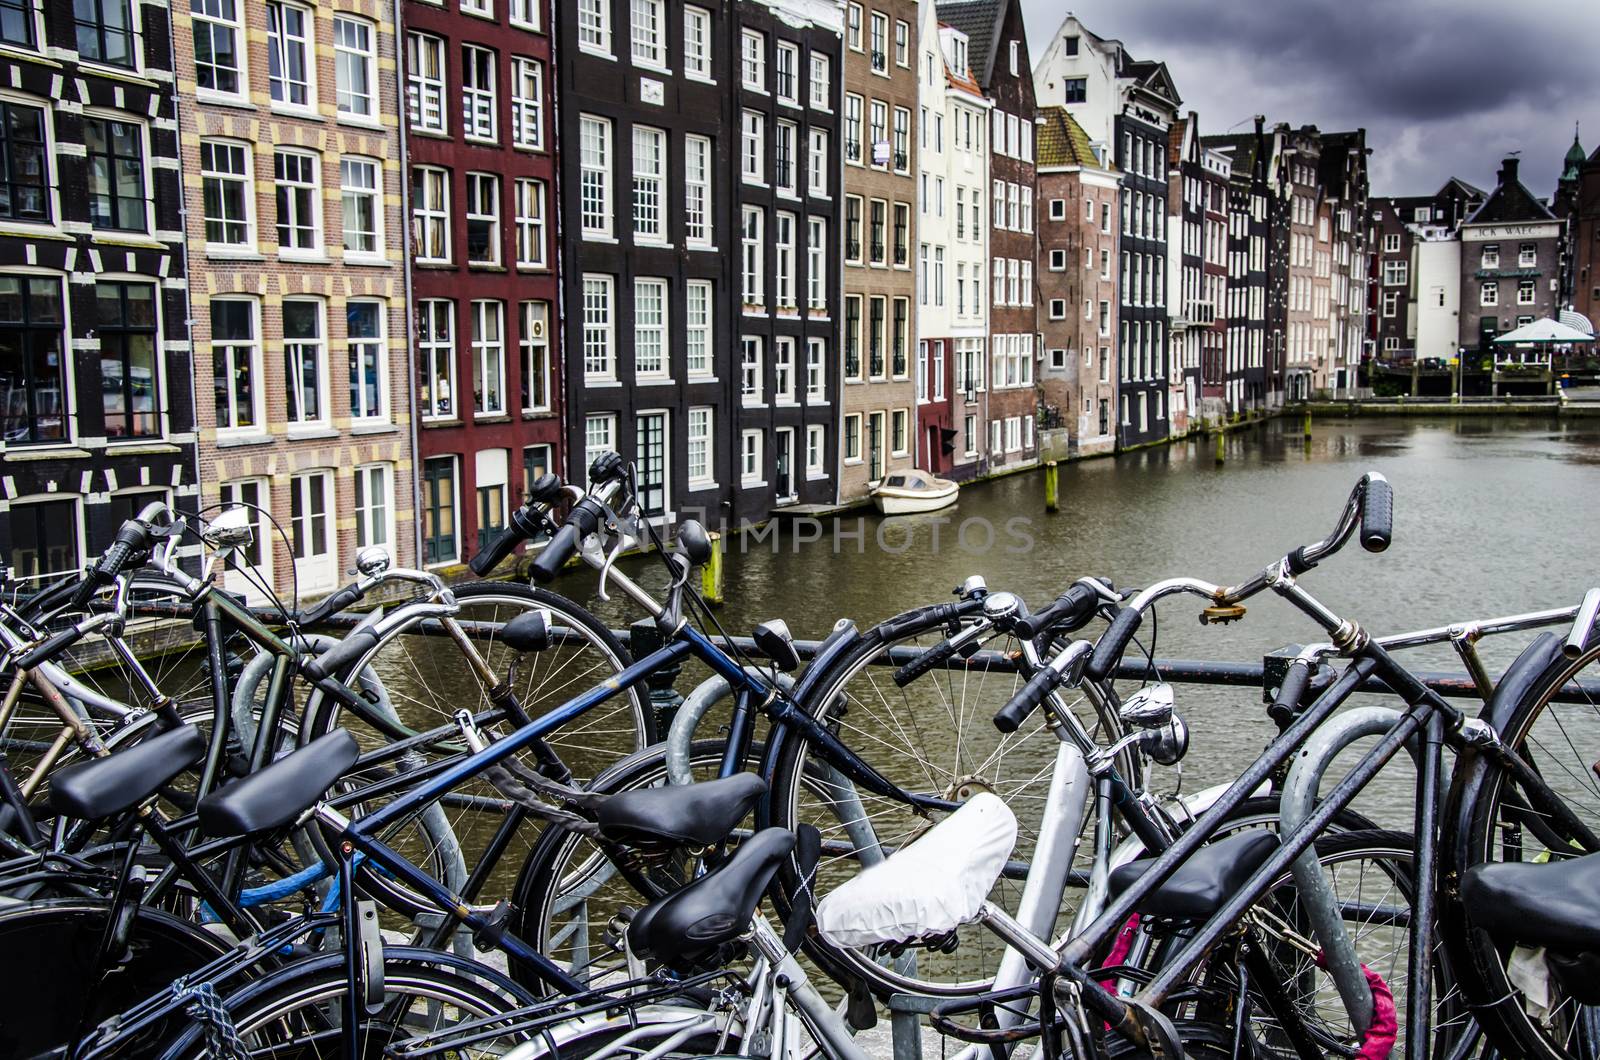 Symbols of amsterdam bicycles and boat moored in one of its cana by MAEKFOTO